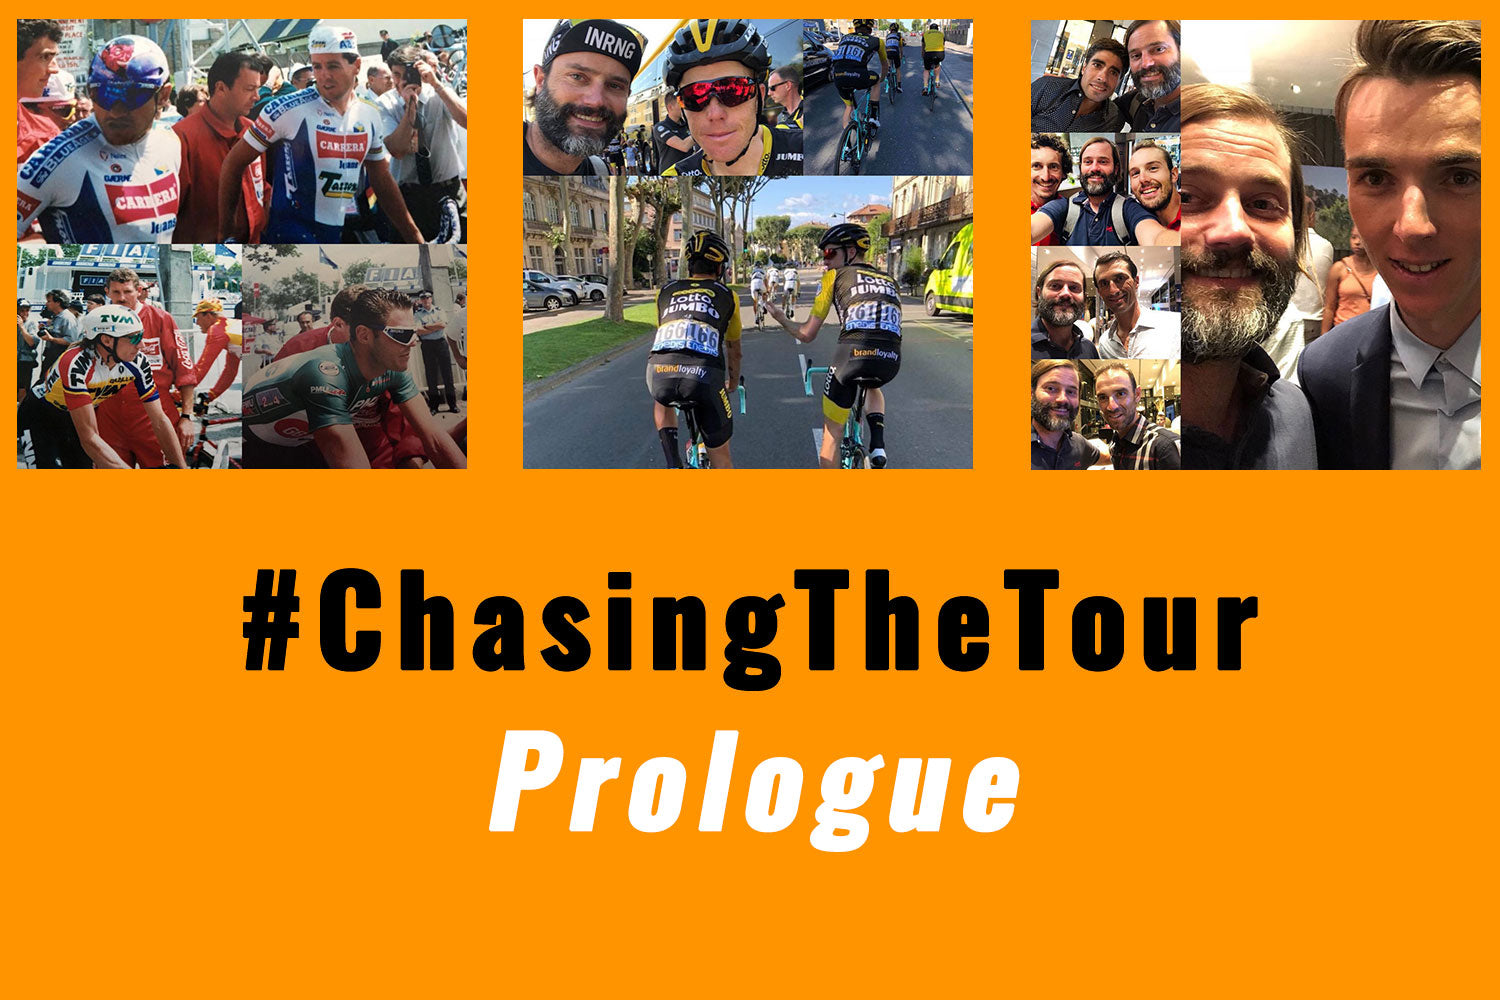 Chasing the Tour - Prologue